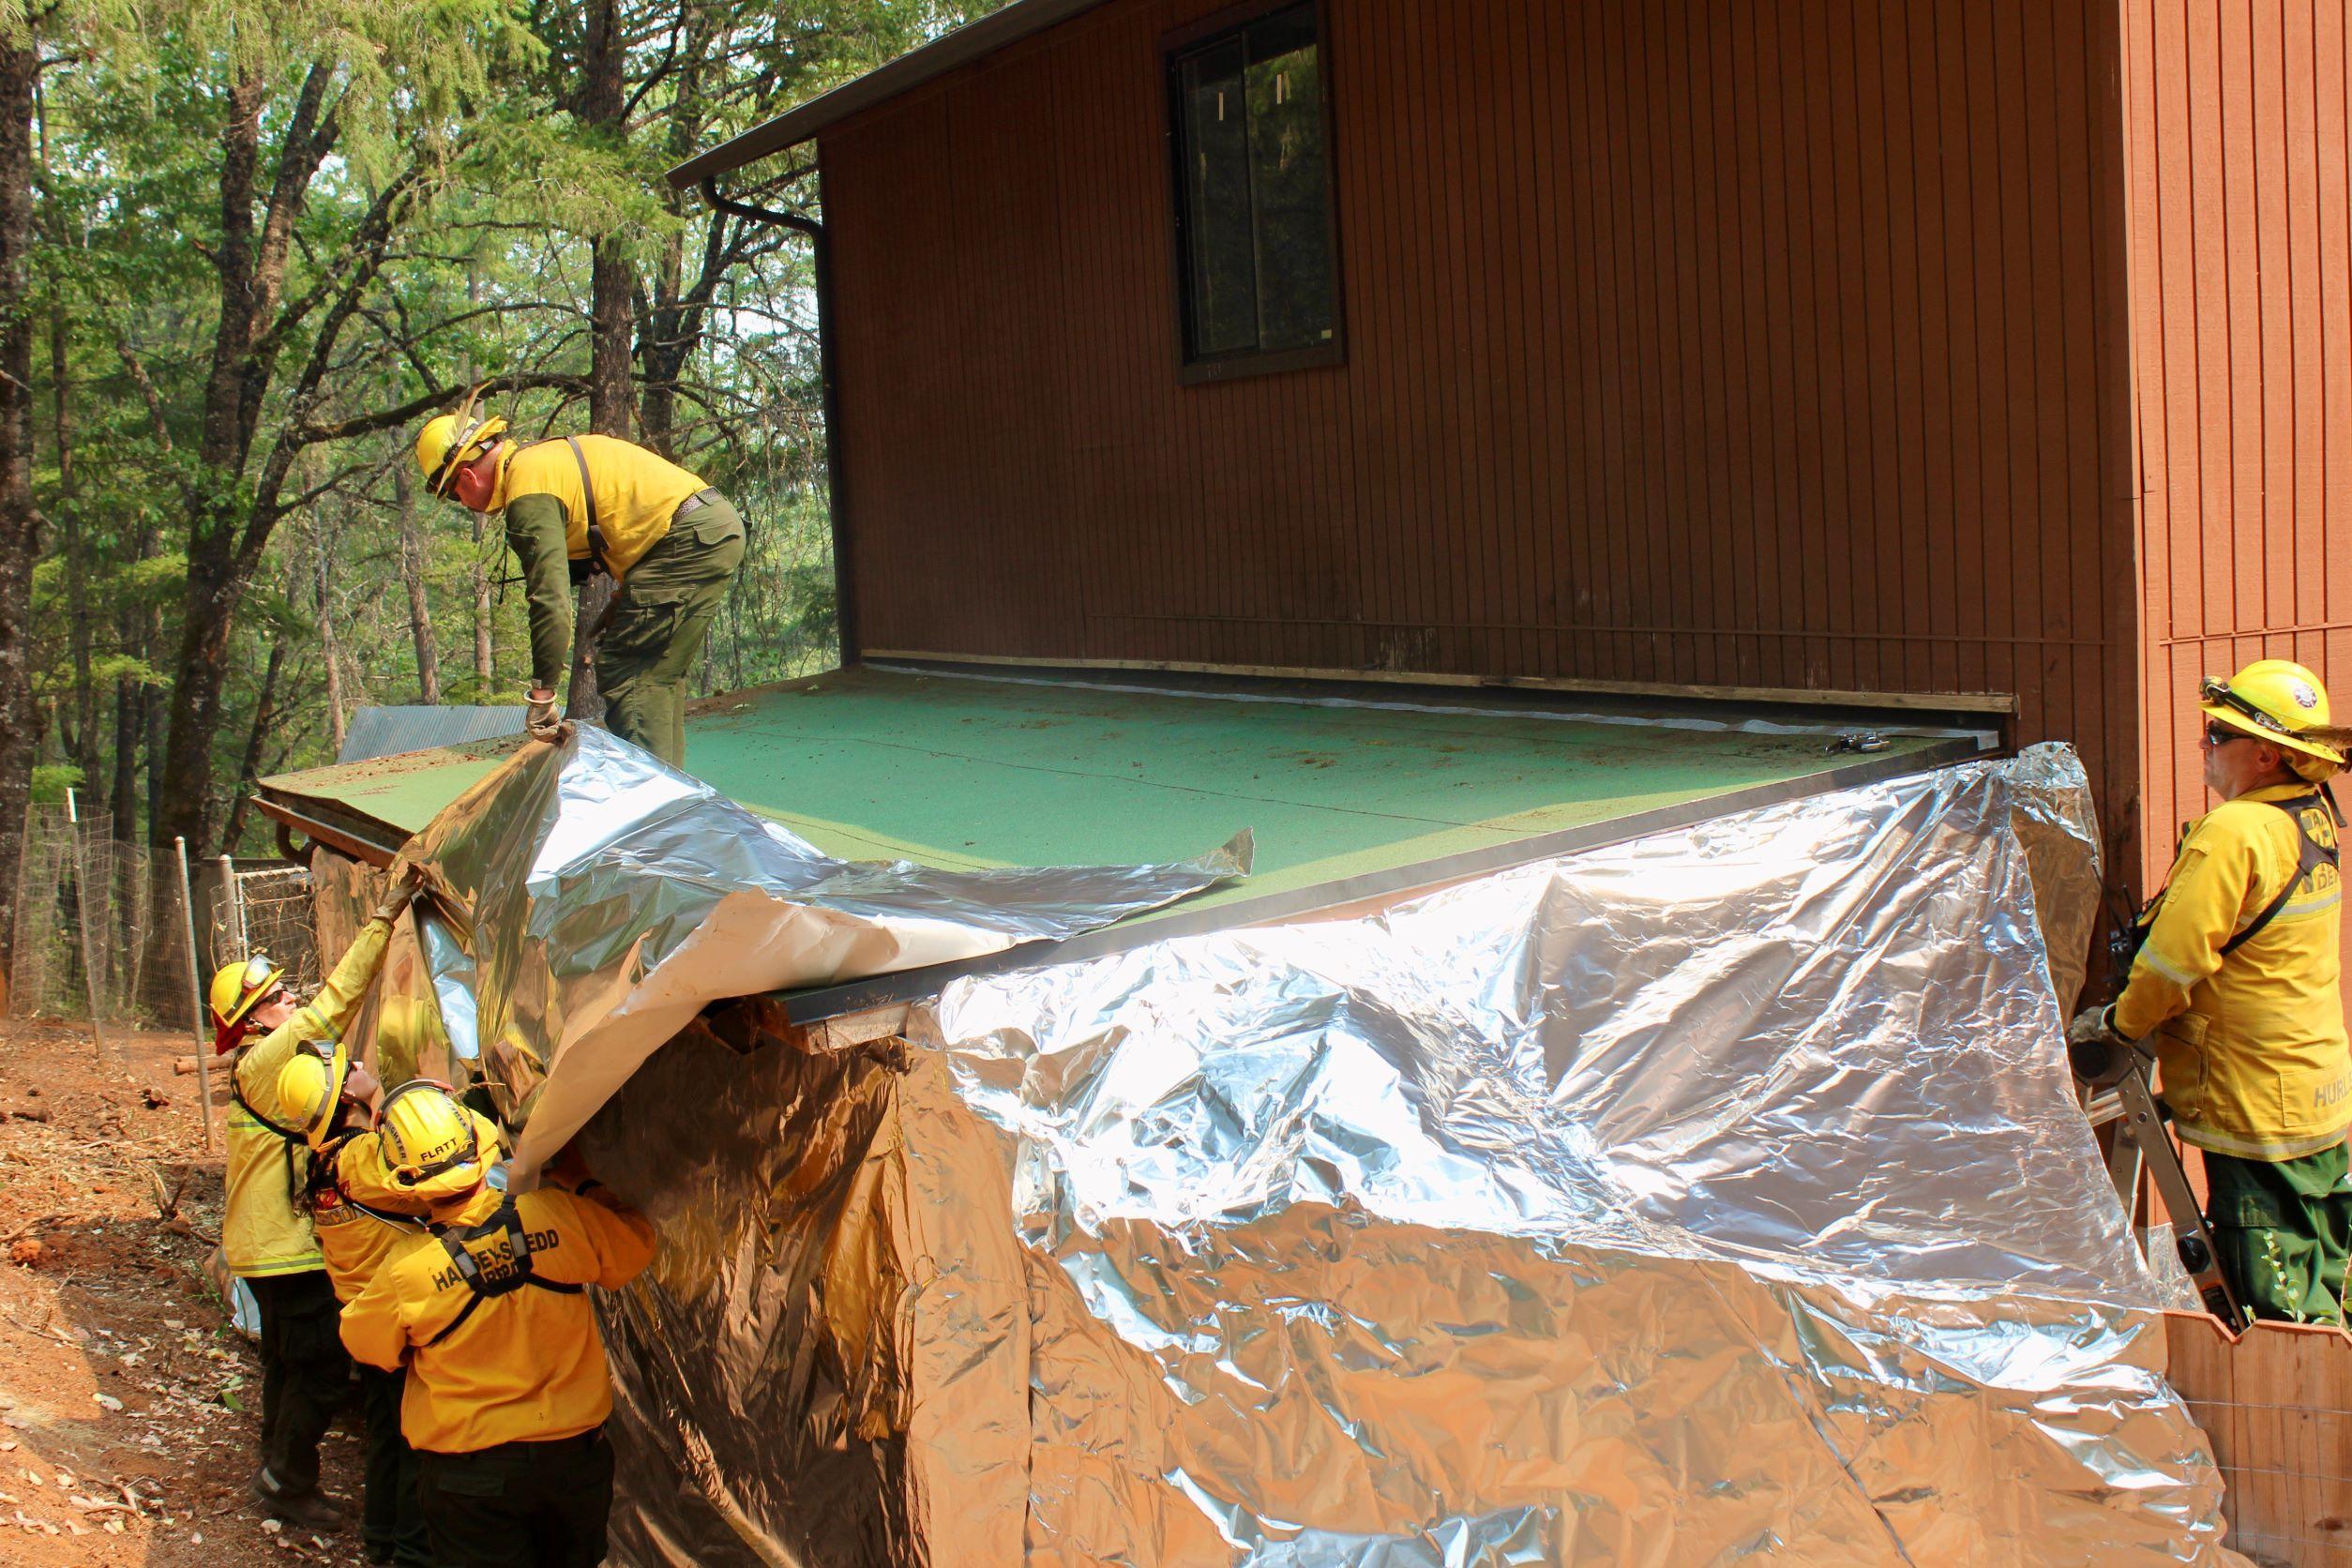 Four firefighters are wrestling structure wrap into place over the back of a structure. A fifth firefighter watches from on a ladder to the side. The structure is against the edge of the forest.